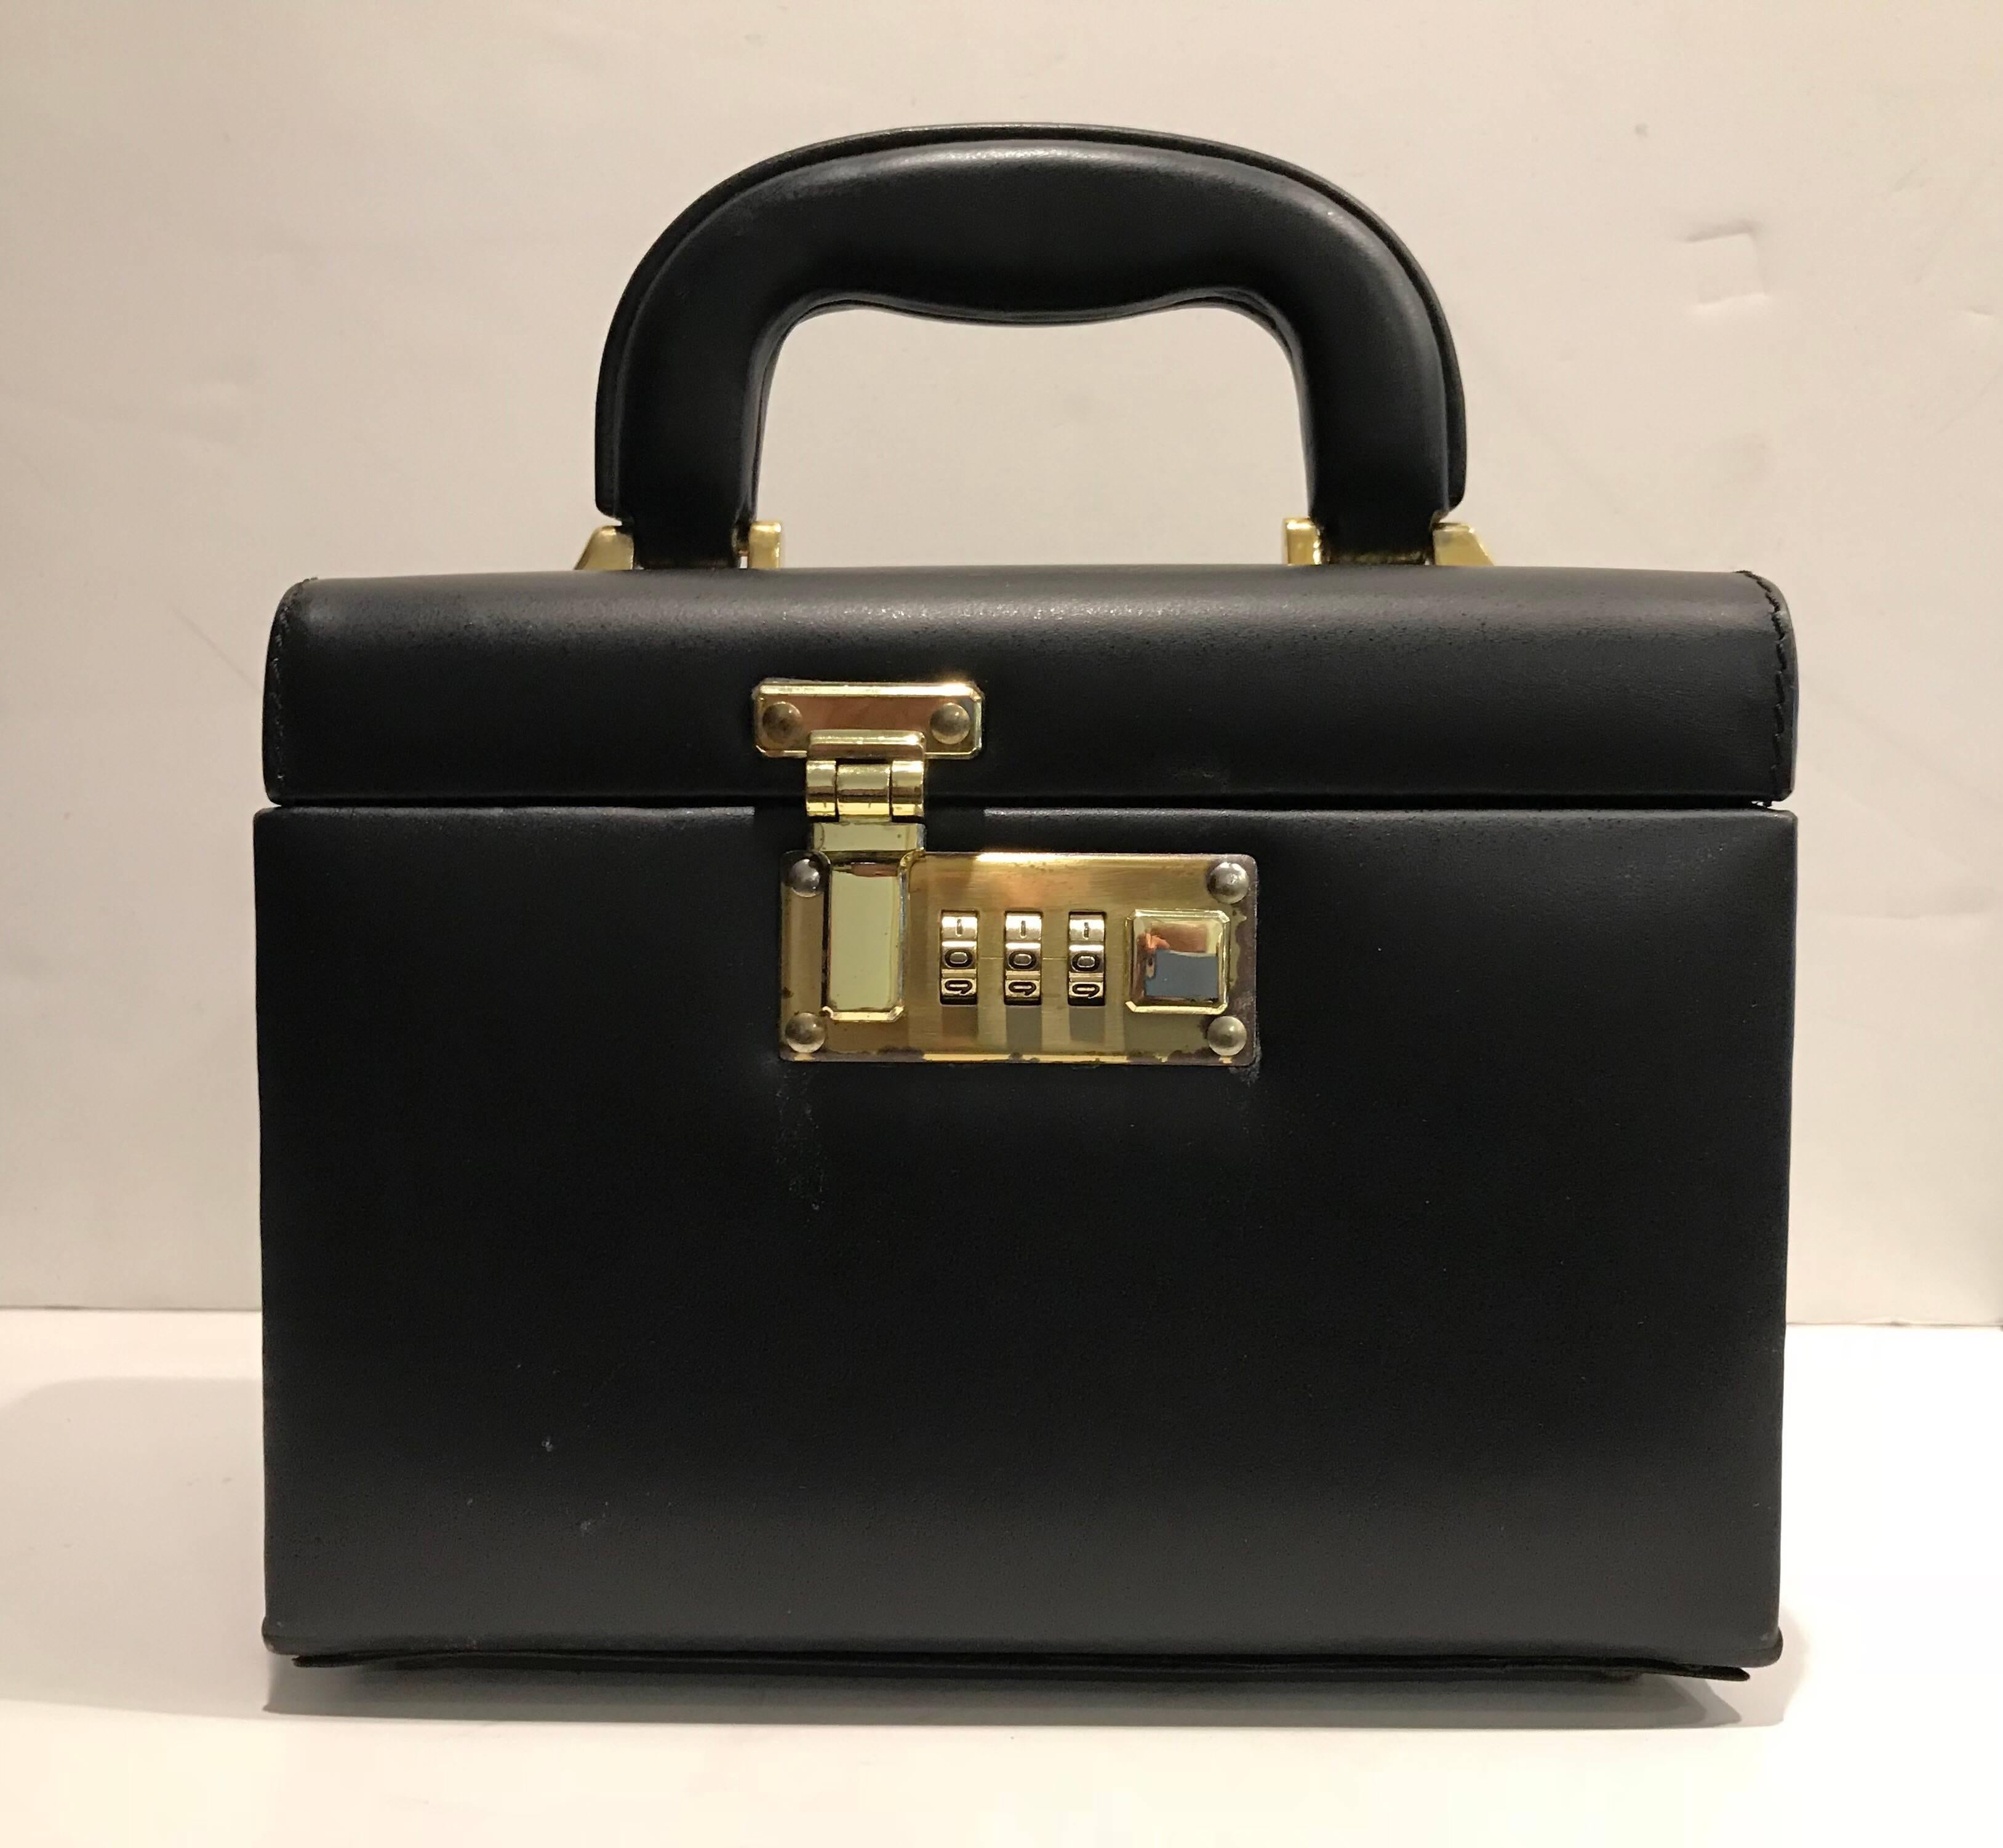 A lovely gift for yourself or a loved one!
1970s a very stylish Classic train case of black leather with brass combination lock, brass hardware,
and leather handle for ease of carrying.
Three faux suede lined removable drawers.
Mirror built into